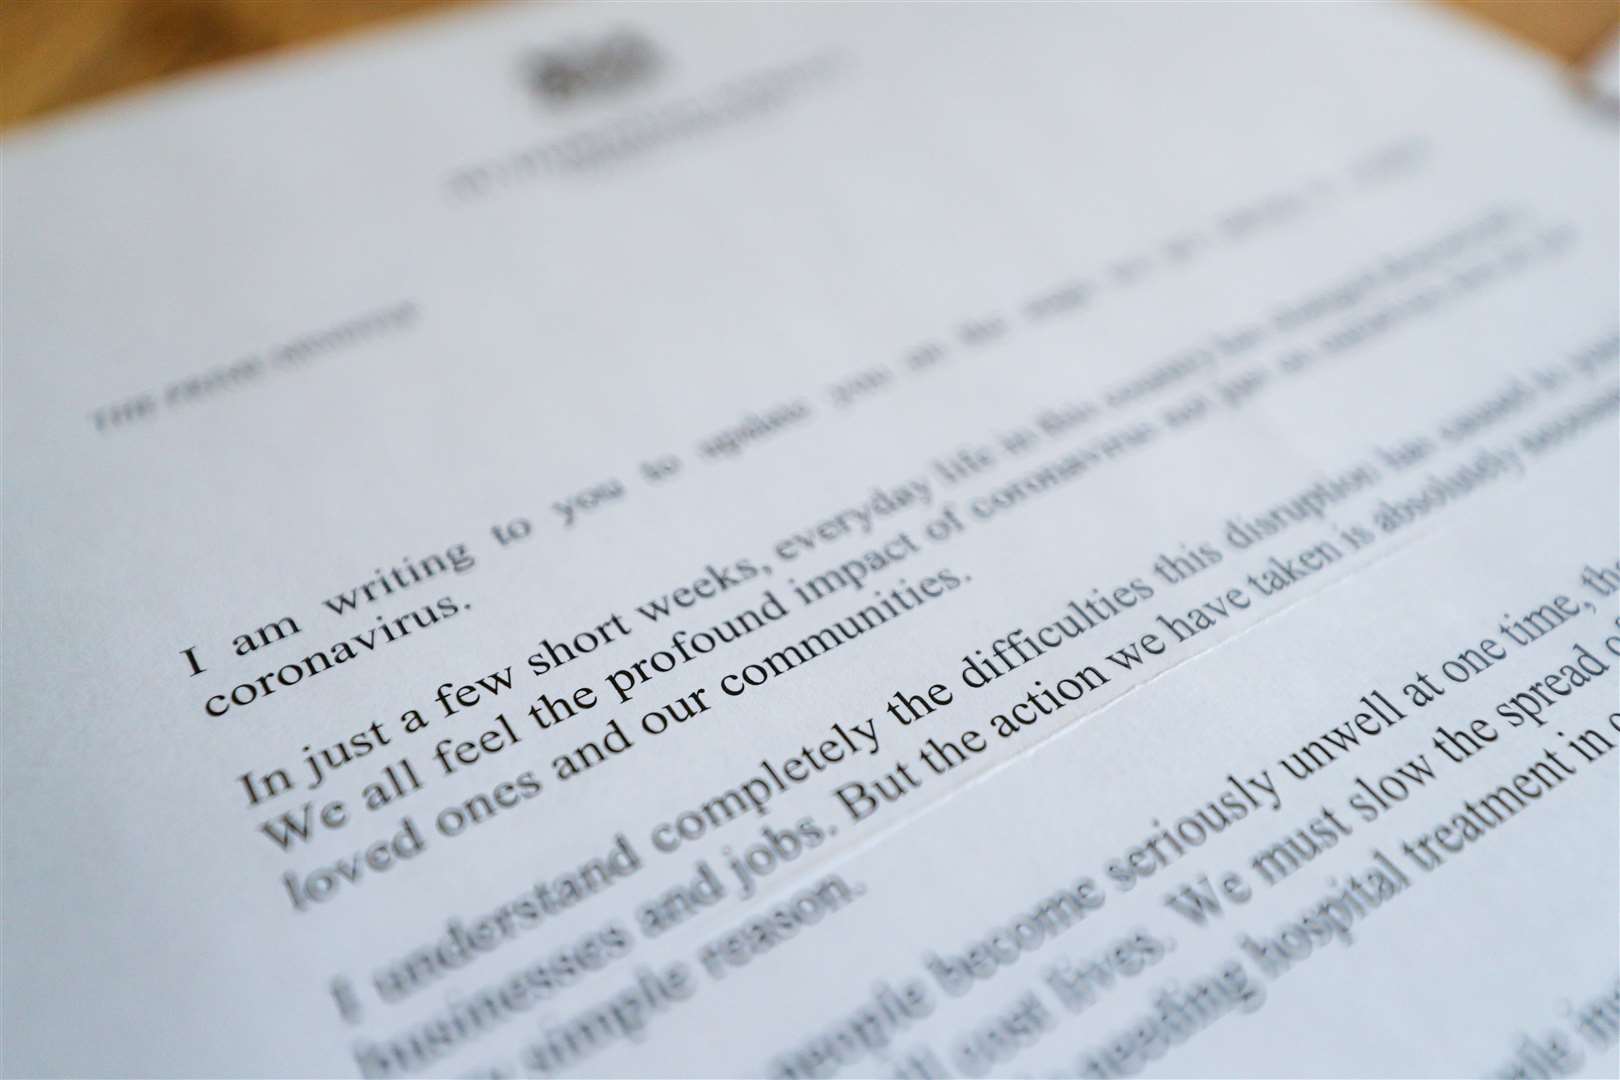 A letter from Prime Minster Boris Johnson to UK residents urging them to stay at home (Scott Wilson/PA)